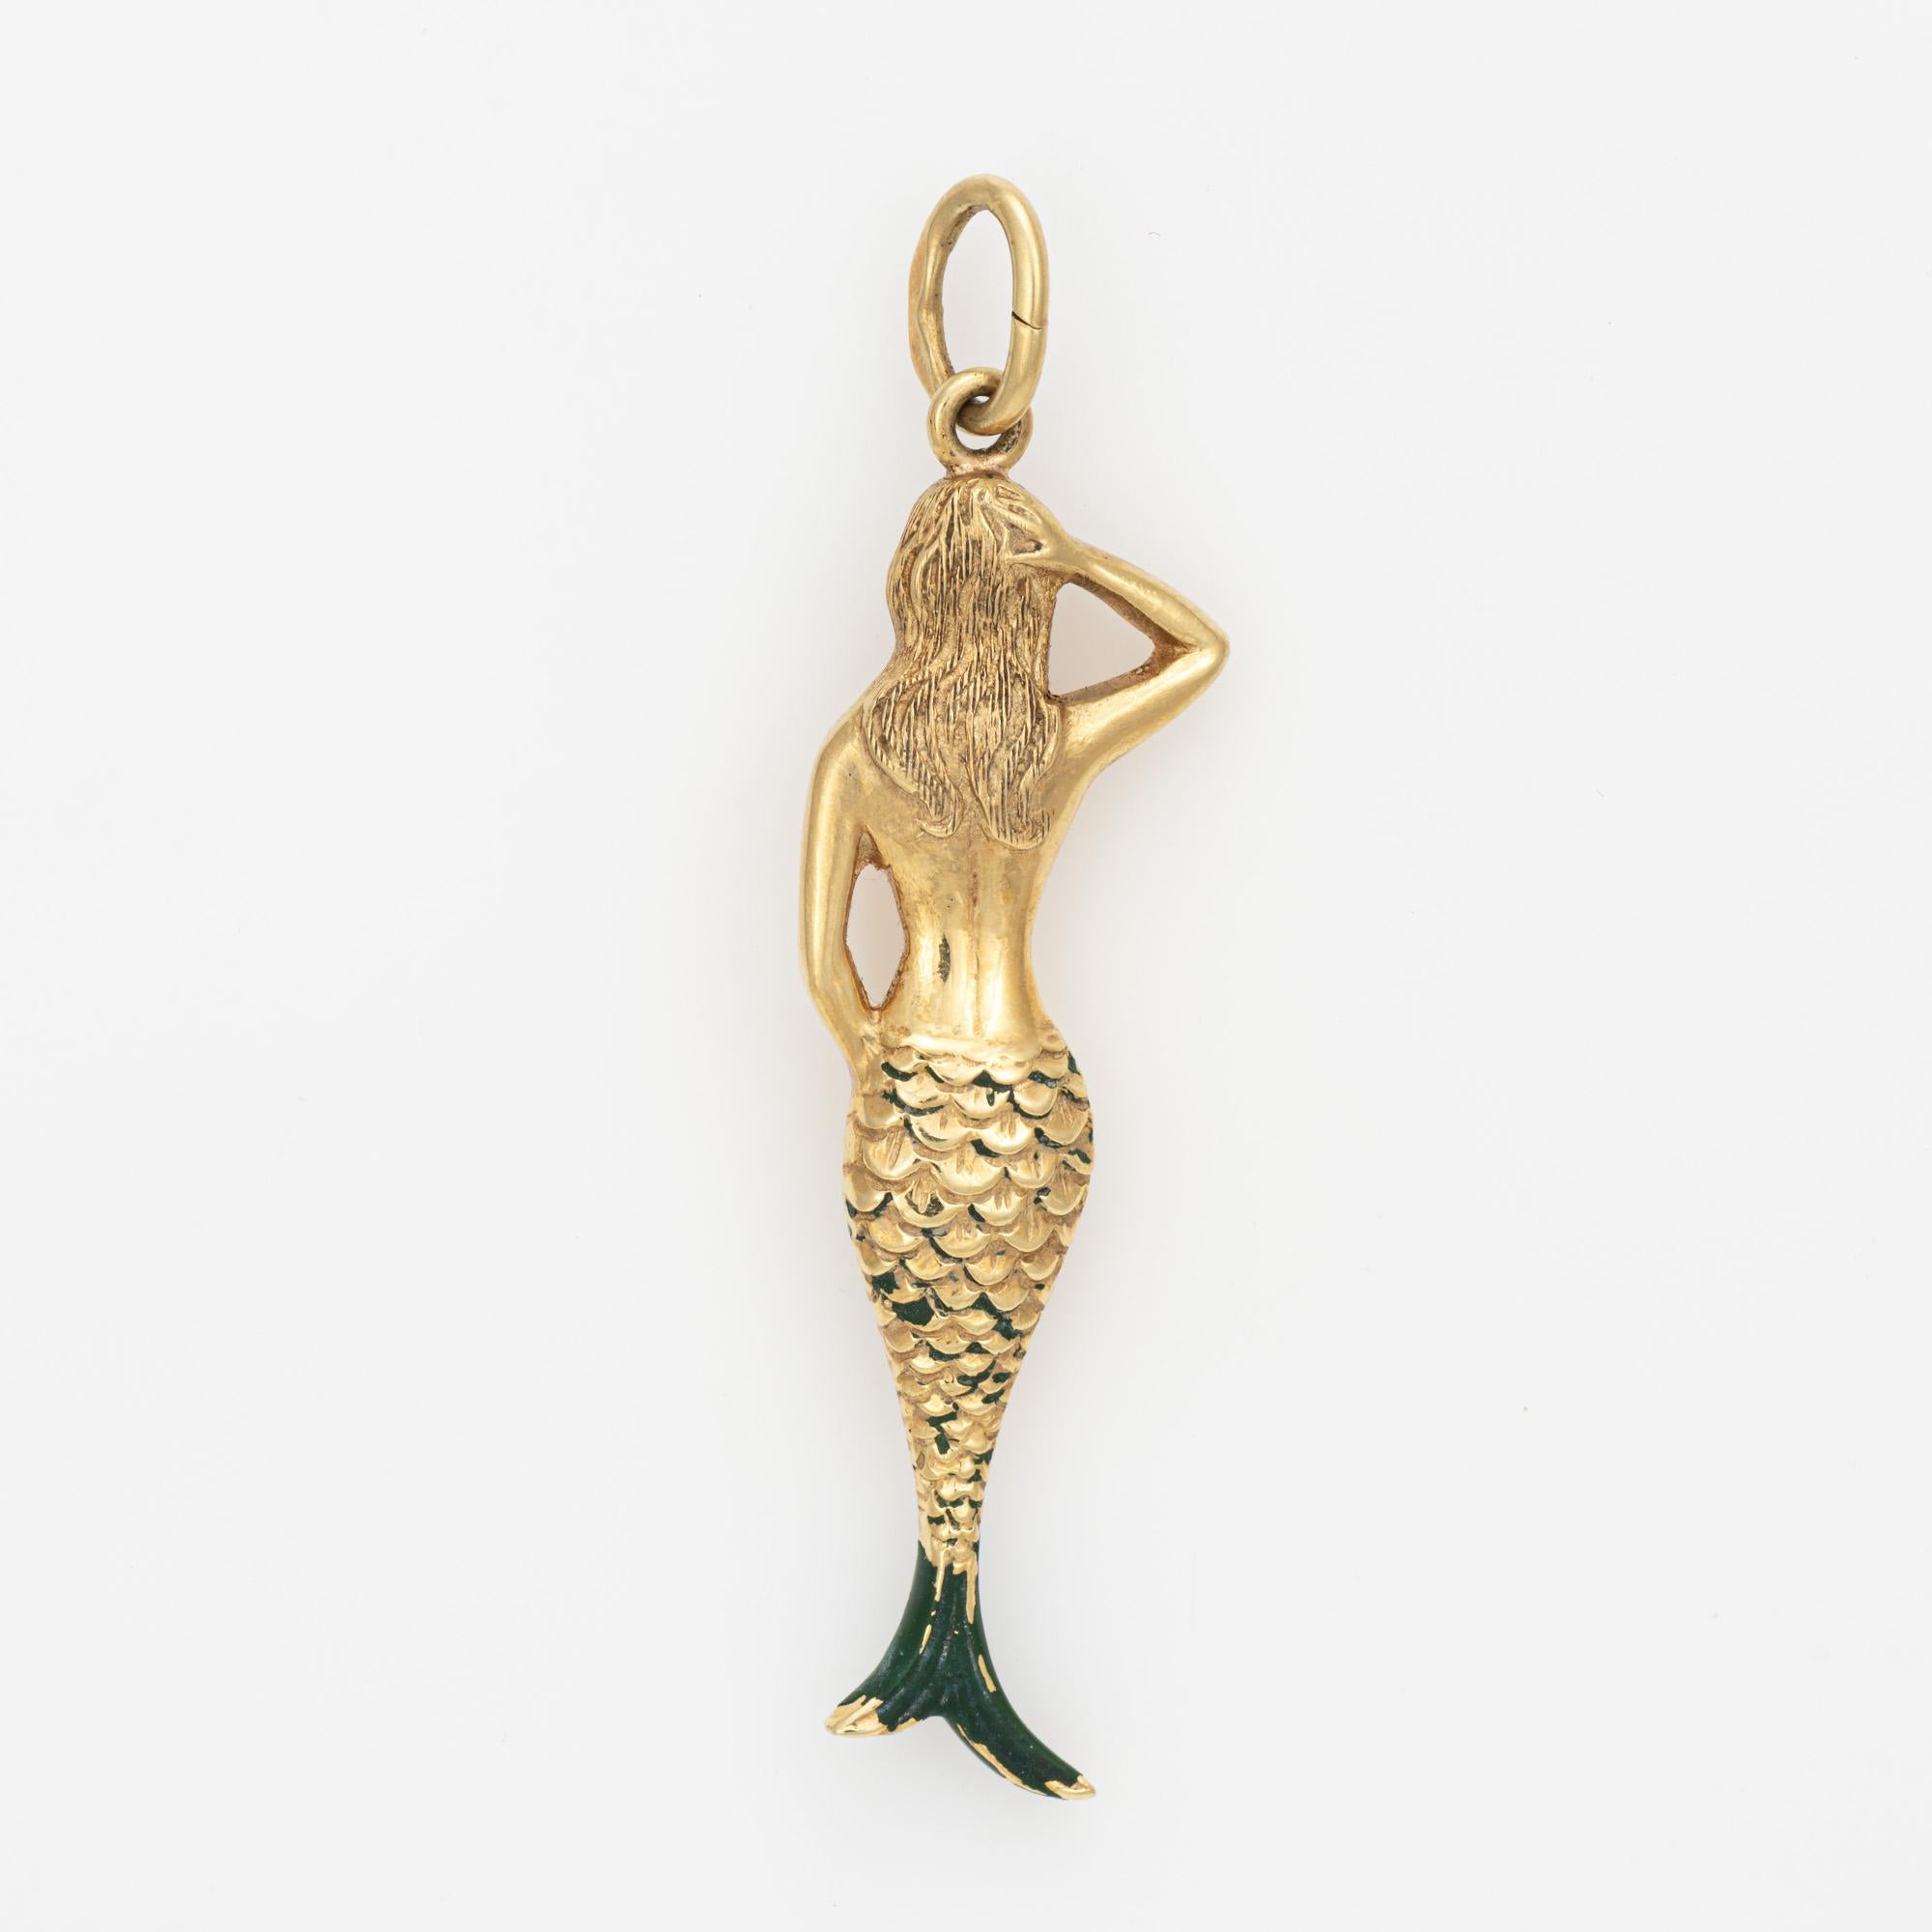 Finely detailed vintage Mermaid charm crafted in 14k yellow gold.  

The poised Mermaid with hand in hair and a green enameled tail makes a nice statement. The enchanting creature of mythology is thought to symbolize freedom and transformation.